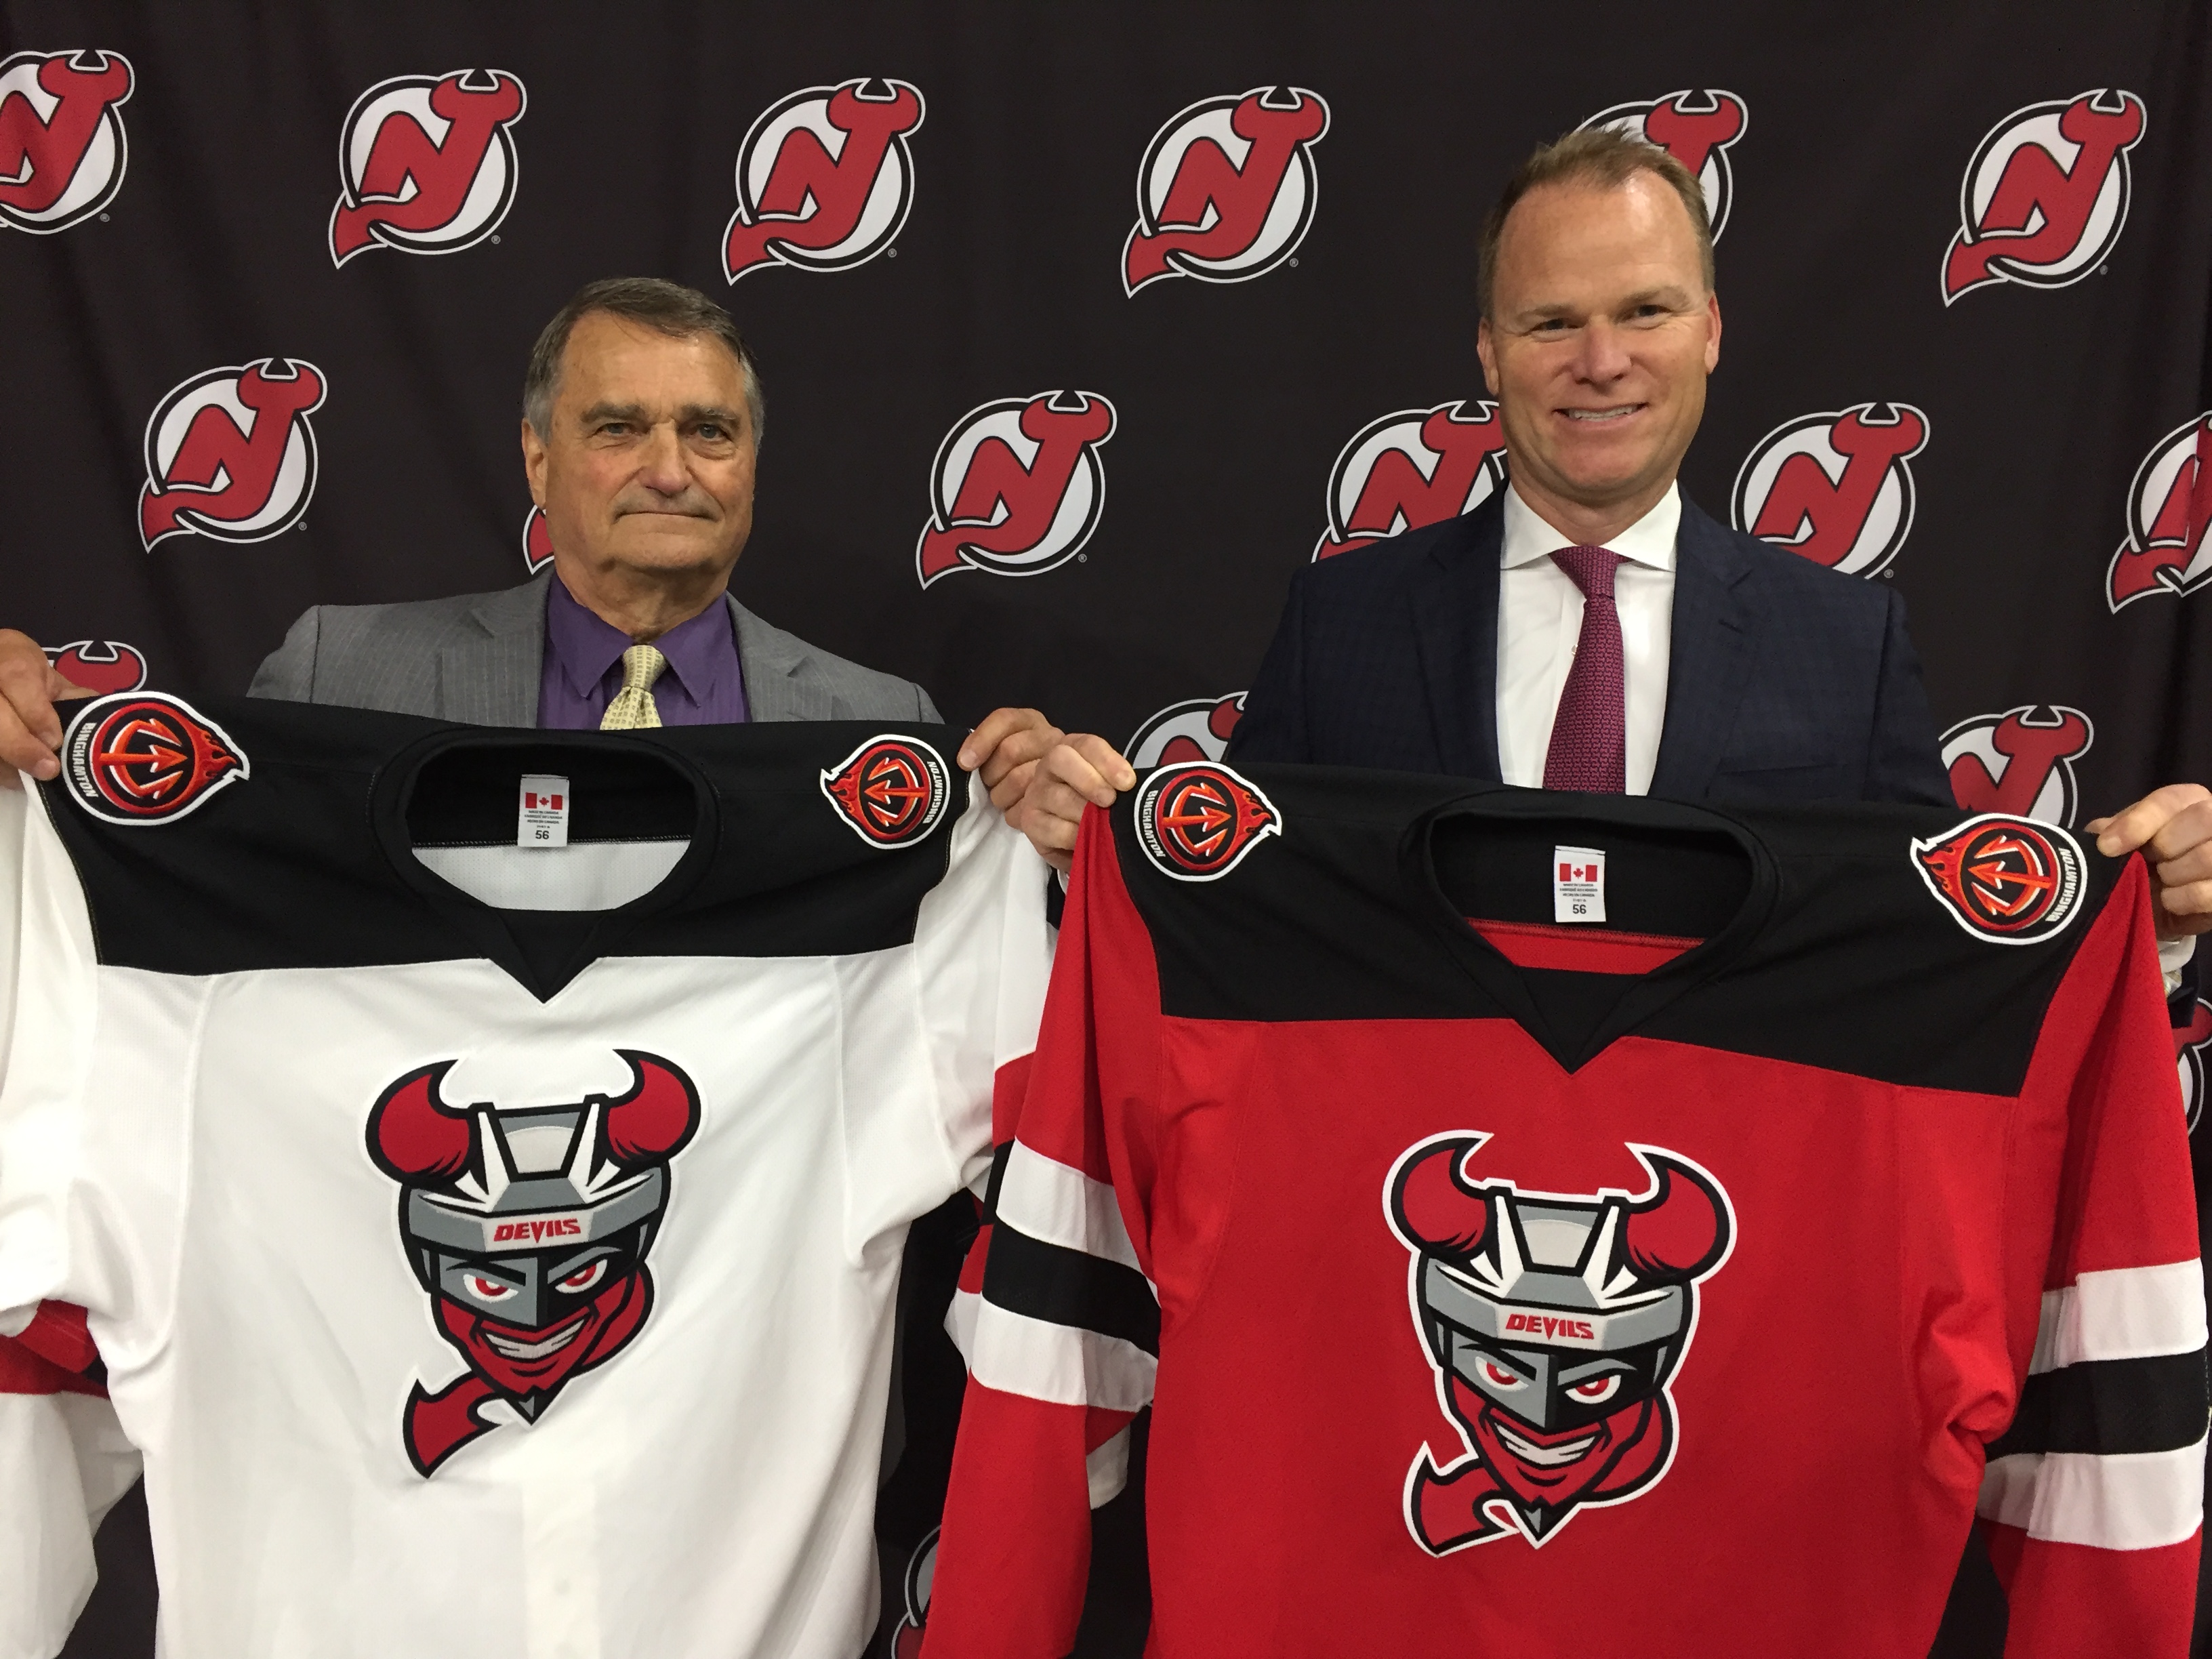 Binghamton Devils unveil very unique logo and jerseys for upcoming